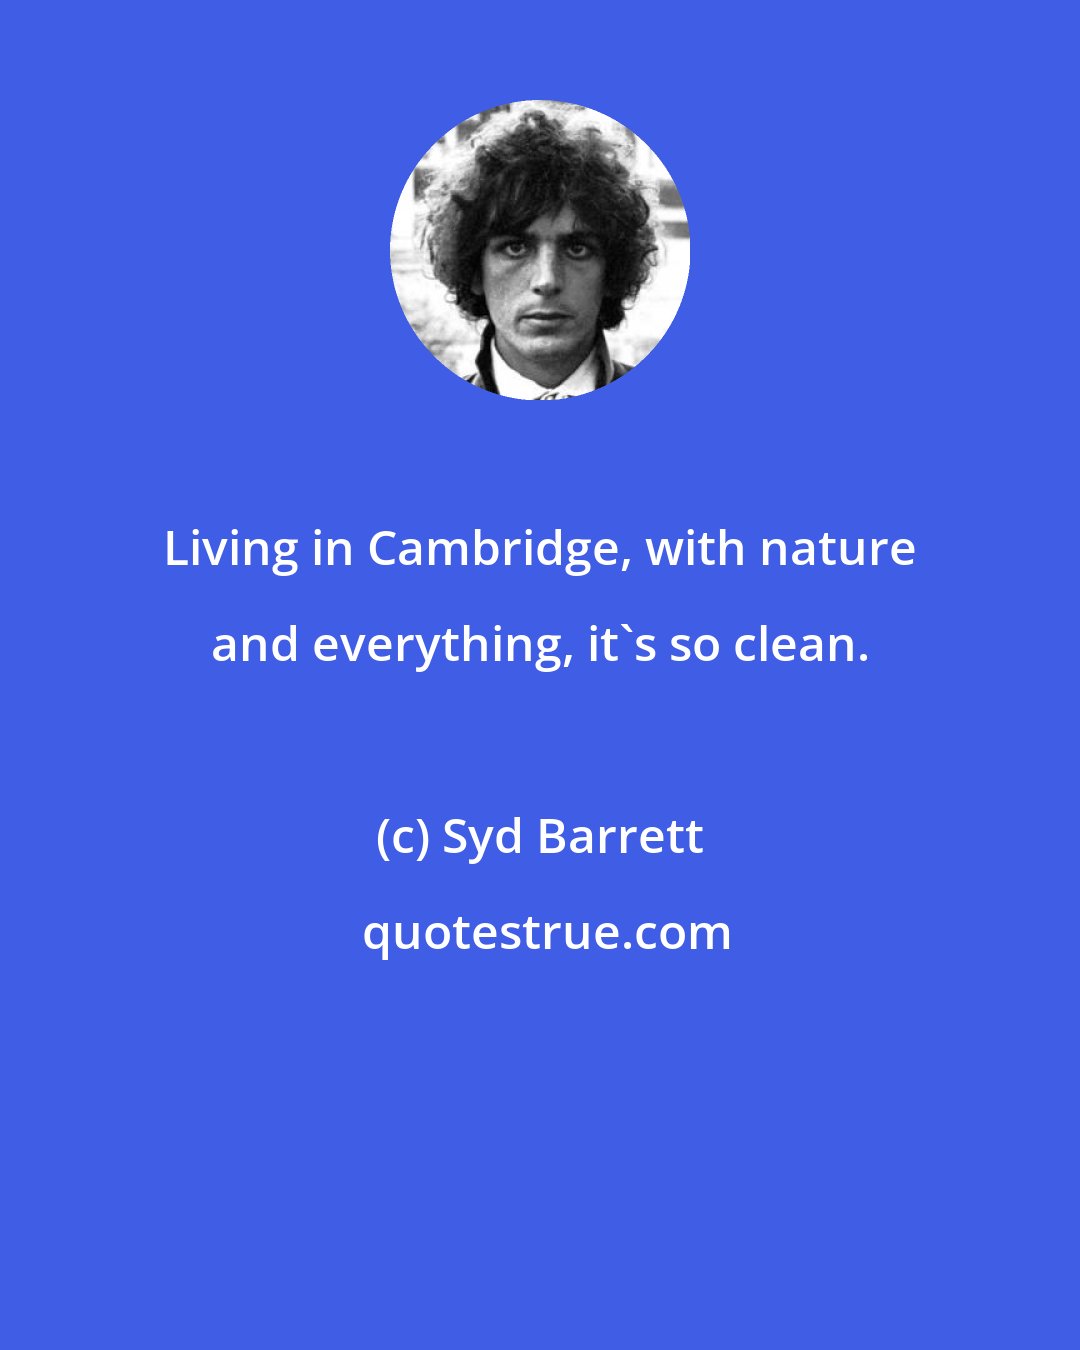 Syd Barrett: Living in Cambridge, with nature and everything, it's so clean.